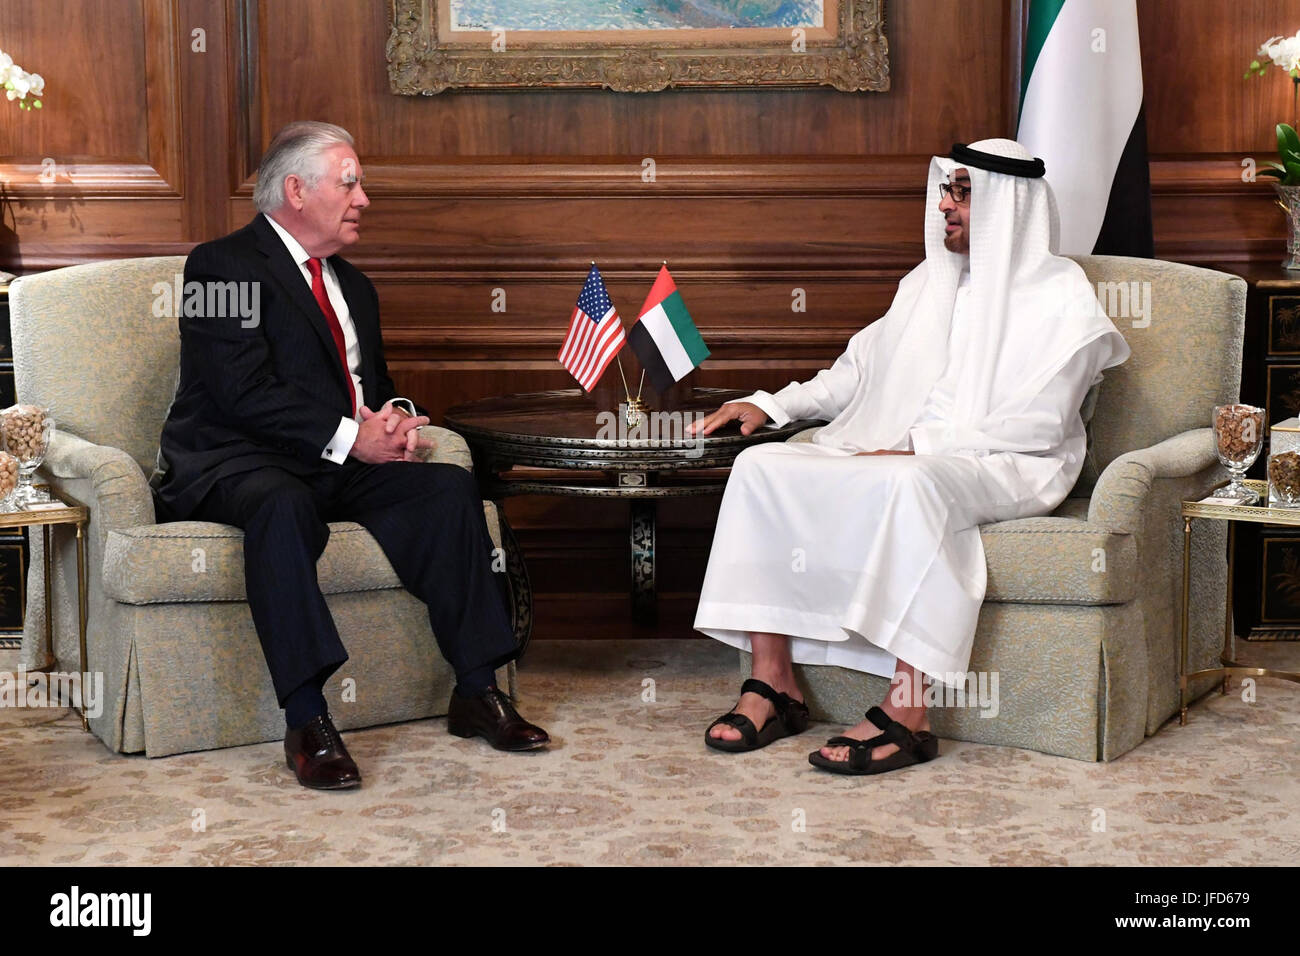 U.S. Secretary of State Rex Tillerson meets with UAE Crown Prince Mohammed bin Zayed in McLean, Virginia, on May 16, 2017. Stock Photo